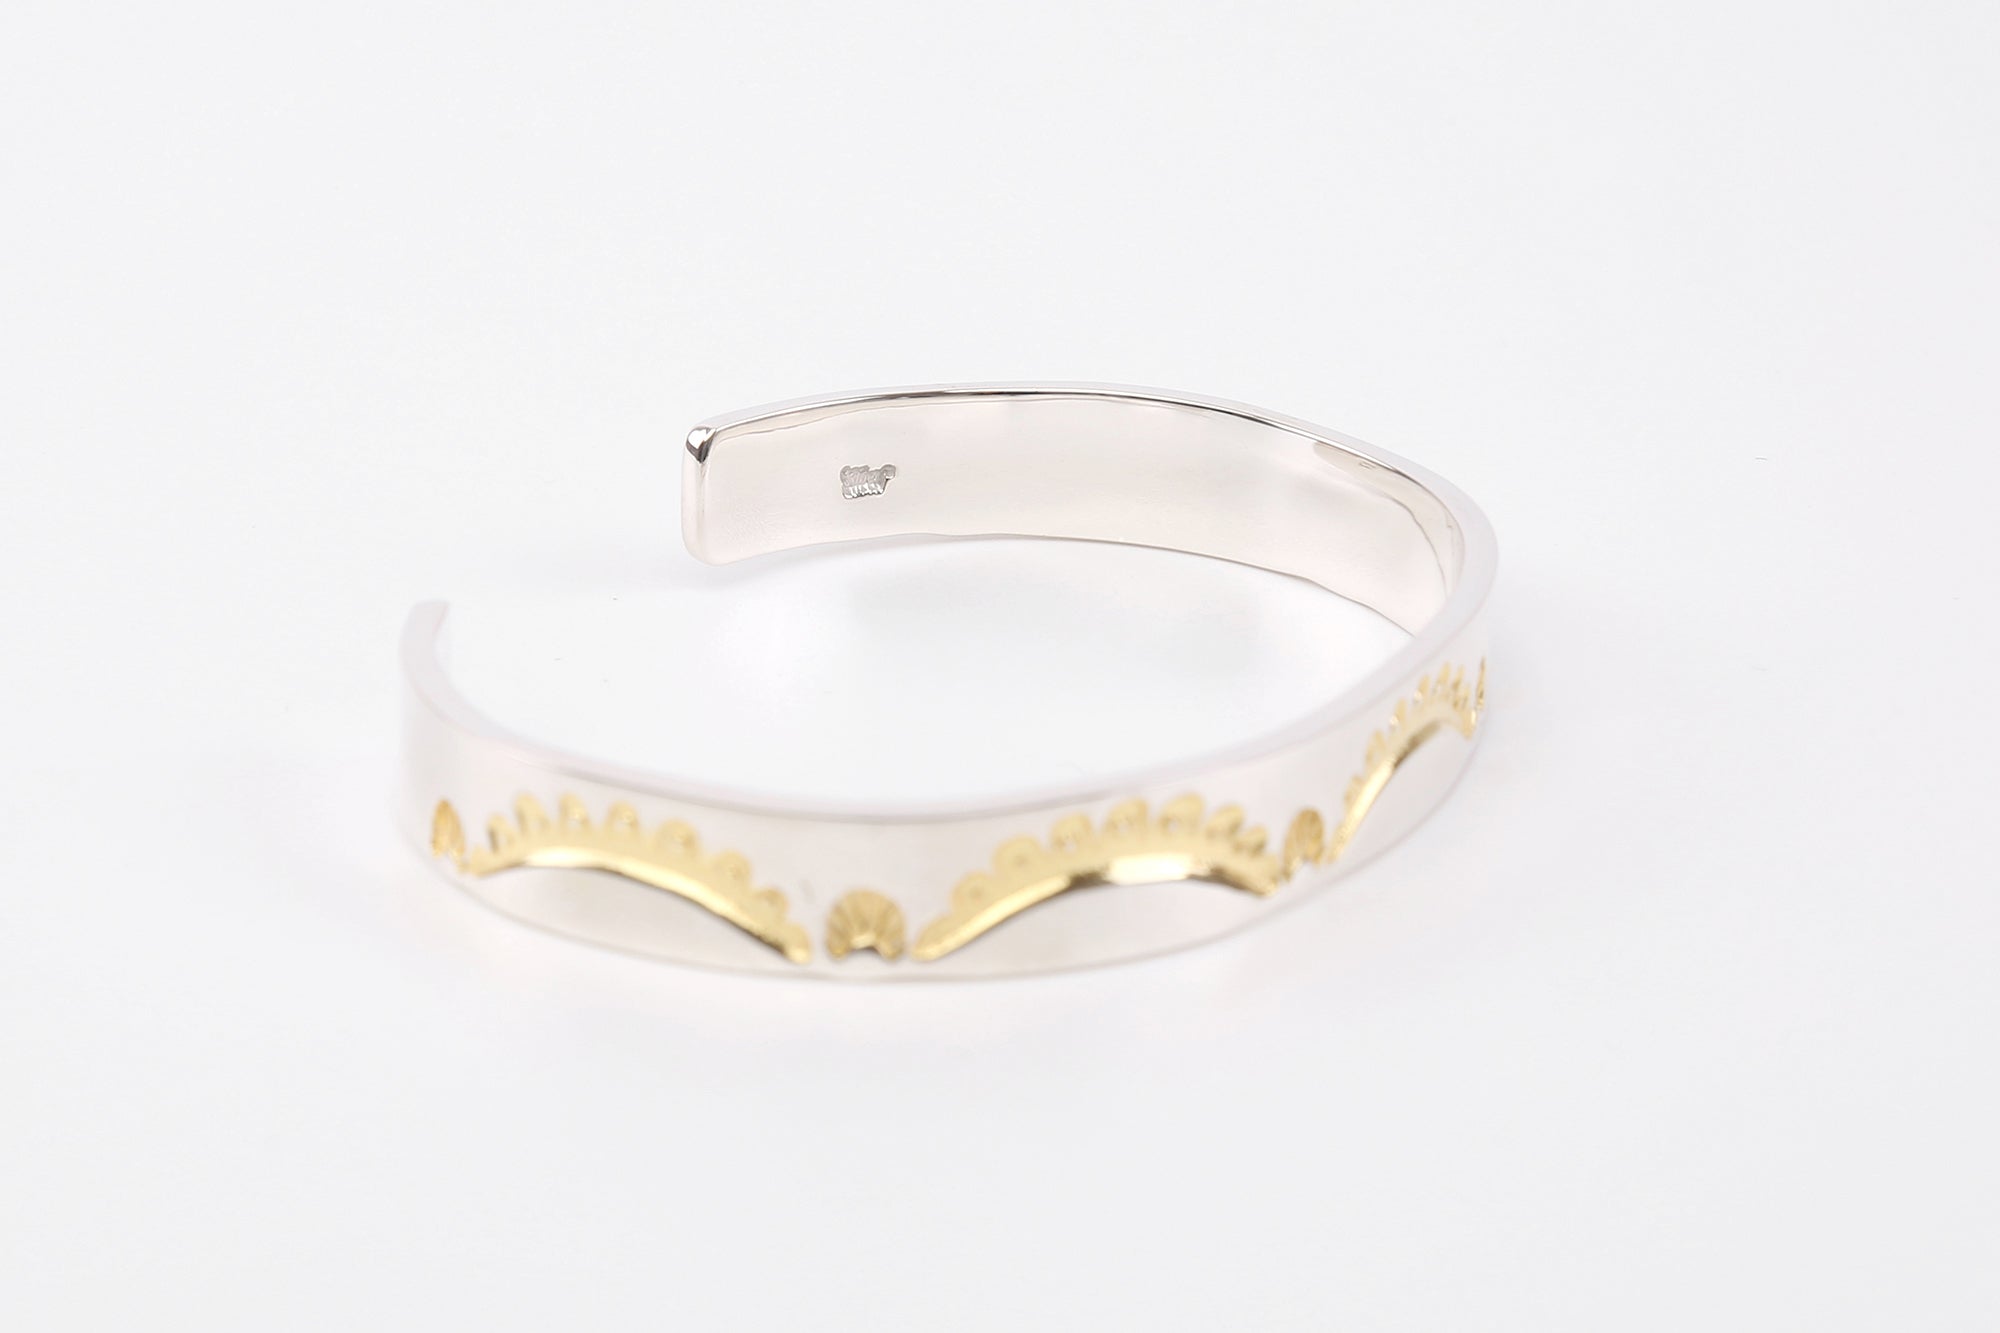 Legend  10mm "Crown" Bangle With 24K Gold